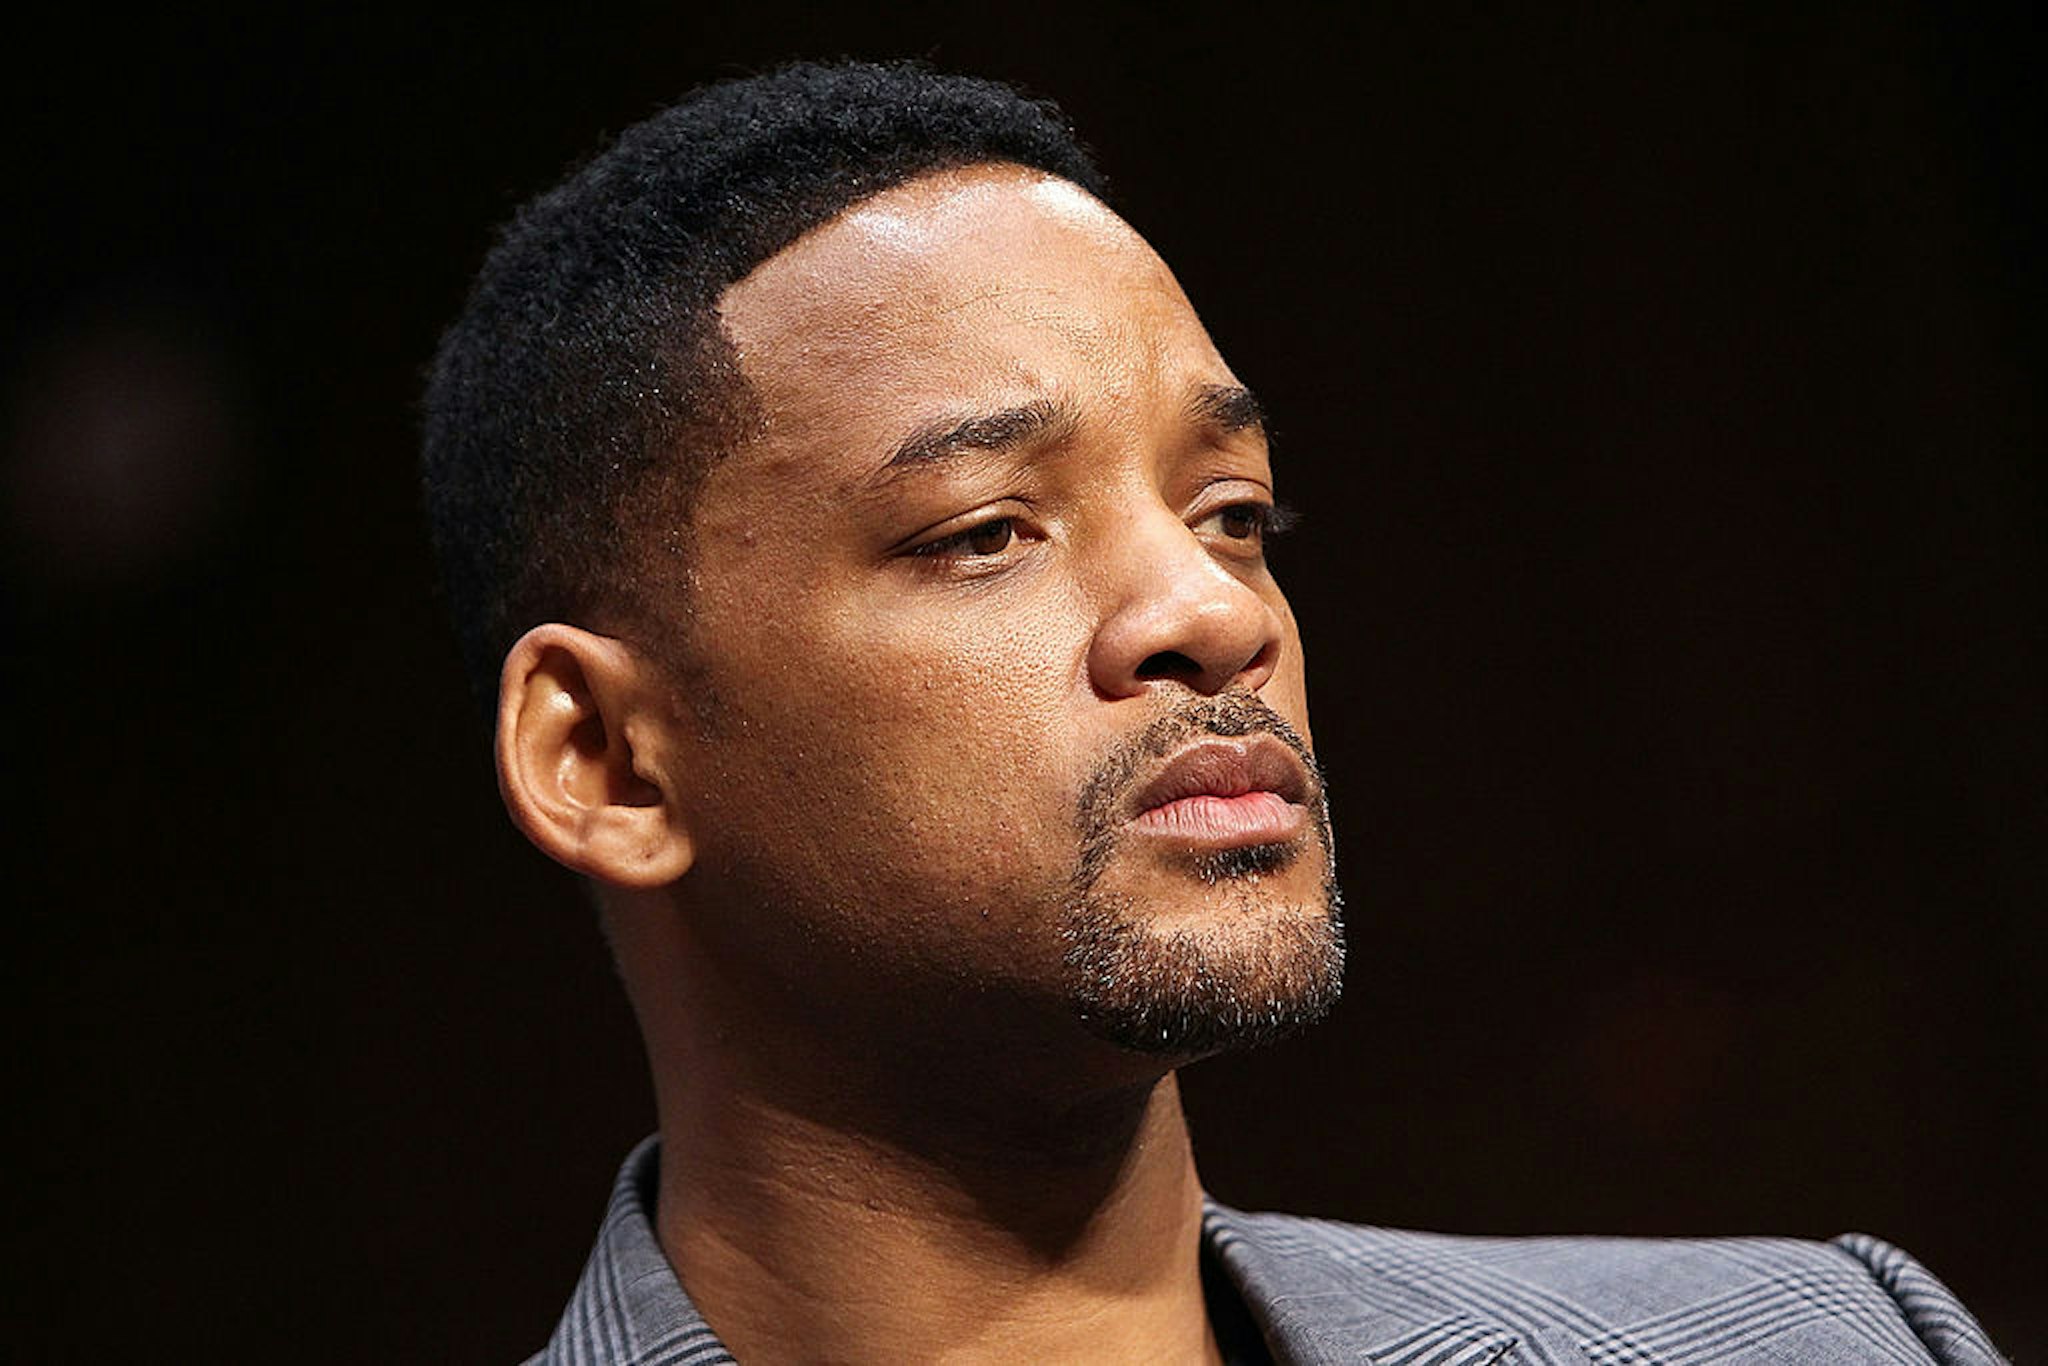 WASHINGTON, DC - JULY 17: Actor Will Smith listens to testimony at the "The Next Ten Years In The Fight Against Human Trafficking: Attacking The Problem With The Right Tools" Committee Hearing at the Hart Senate Office Building on July 17, 2012 in Washington, DC. (Photo by Paul Morigi/WireImage)